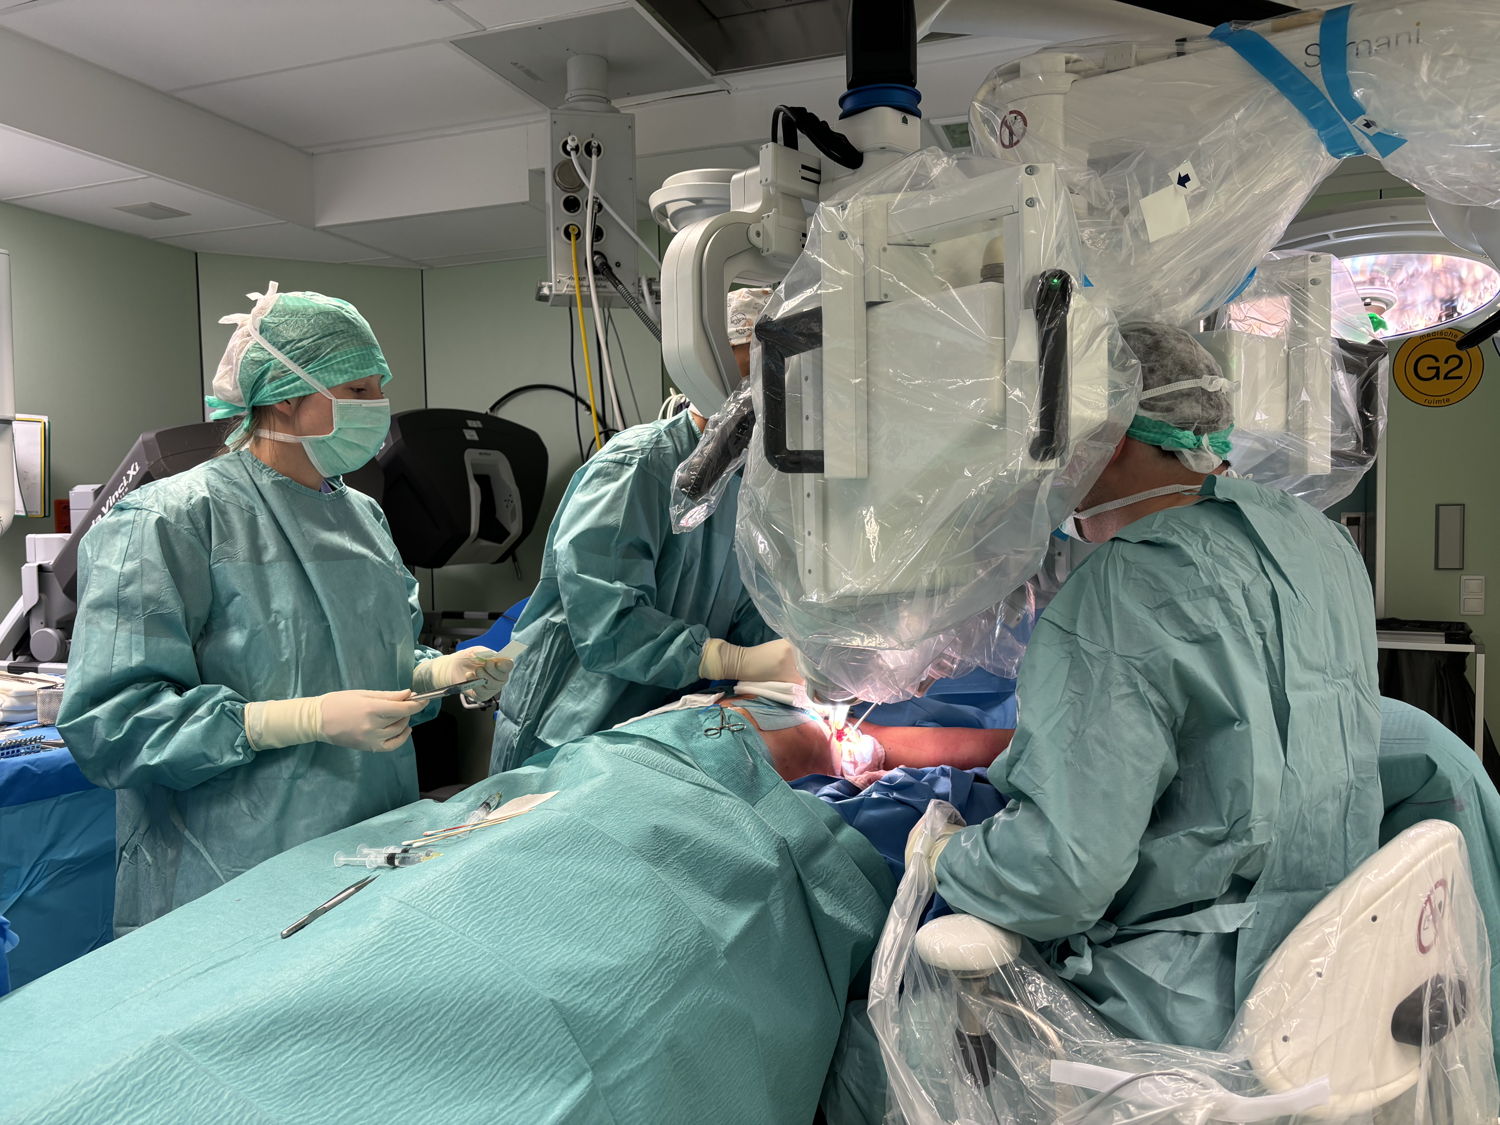 Prof Nistor operates the Symani microsurgery robot for the transplantation in the axilla.